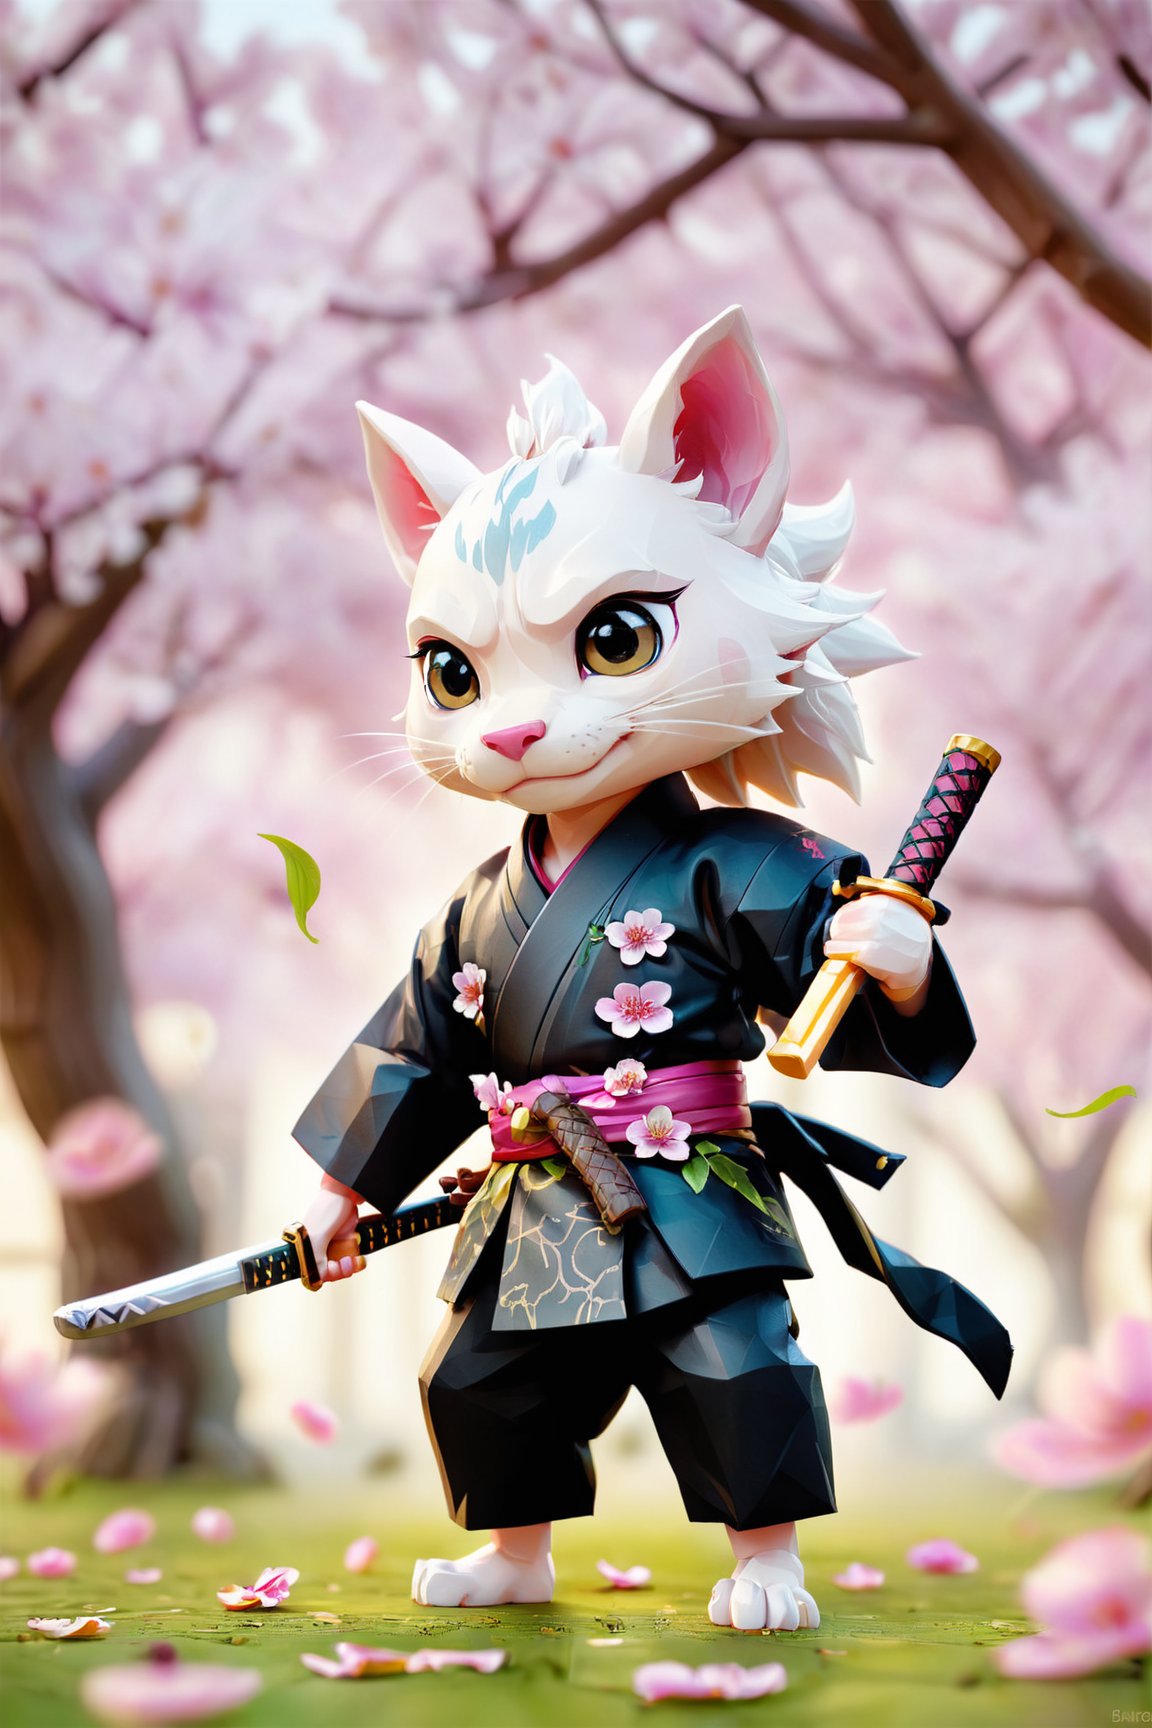 Amazing detailed photography of a cute adorable samurai dragon holding Katana with 2 paws, Cherry Blossom Tree petals floating in air, high resolution, piercing eyes,lifelike fur, Anti-Aliasing, FXAA, De-Noise, Post-Production, SFX, insanely detailed & intricate, hypermaximalist, elegant, ornate, hyper realistic, super detailed, noir coloration, serene, 16k resolution, full body,
